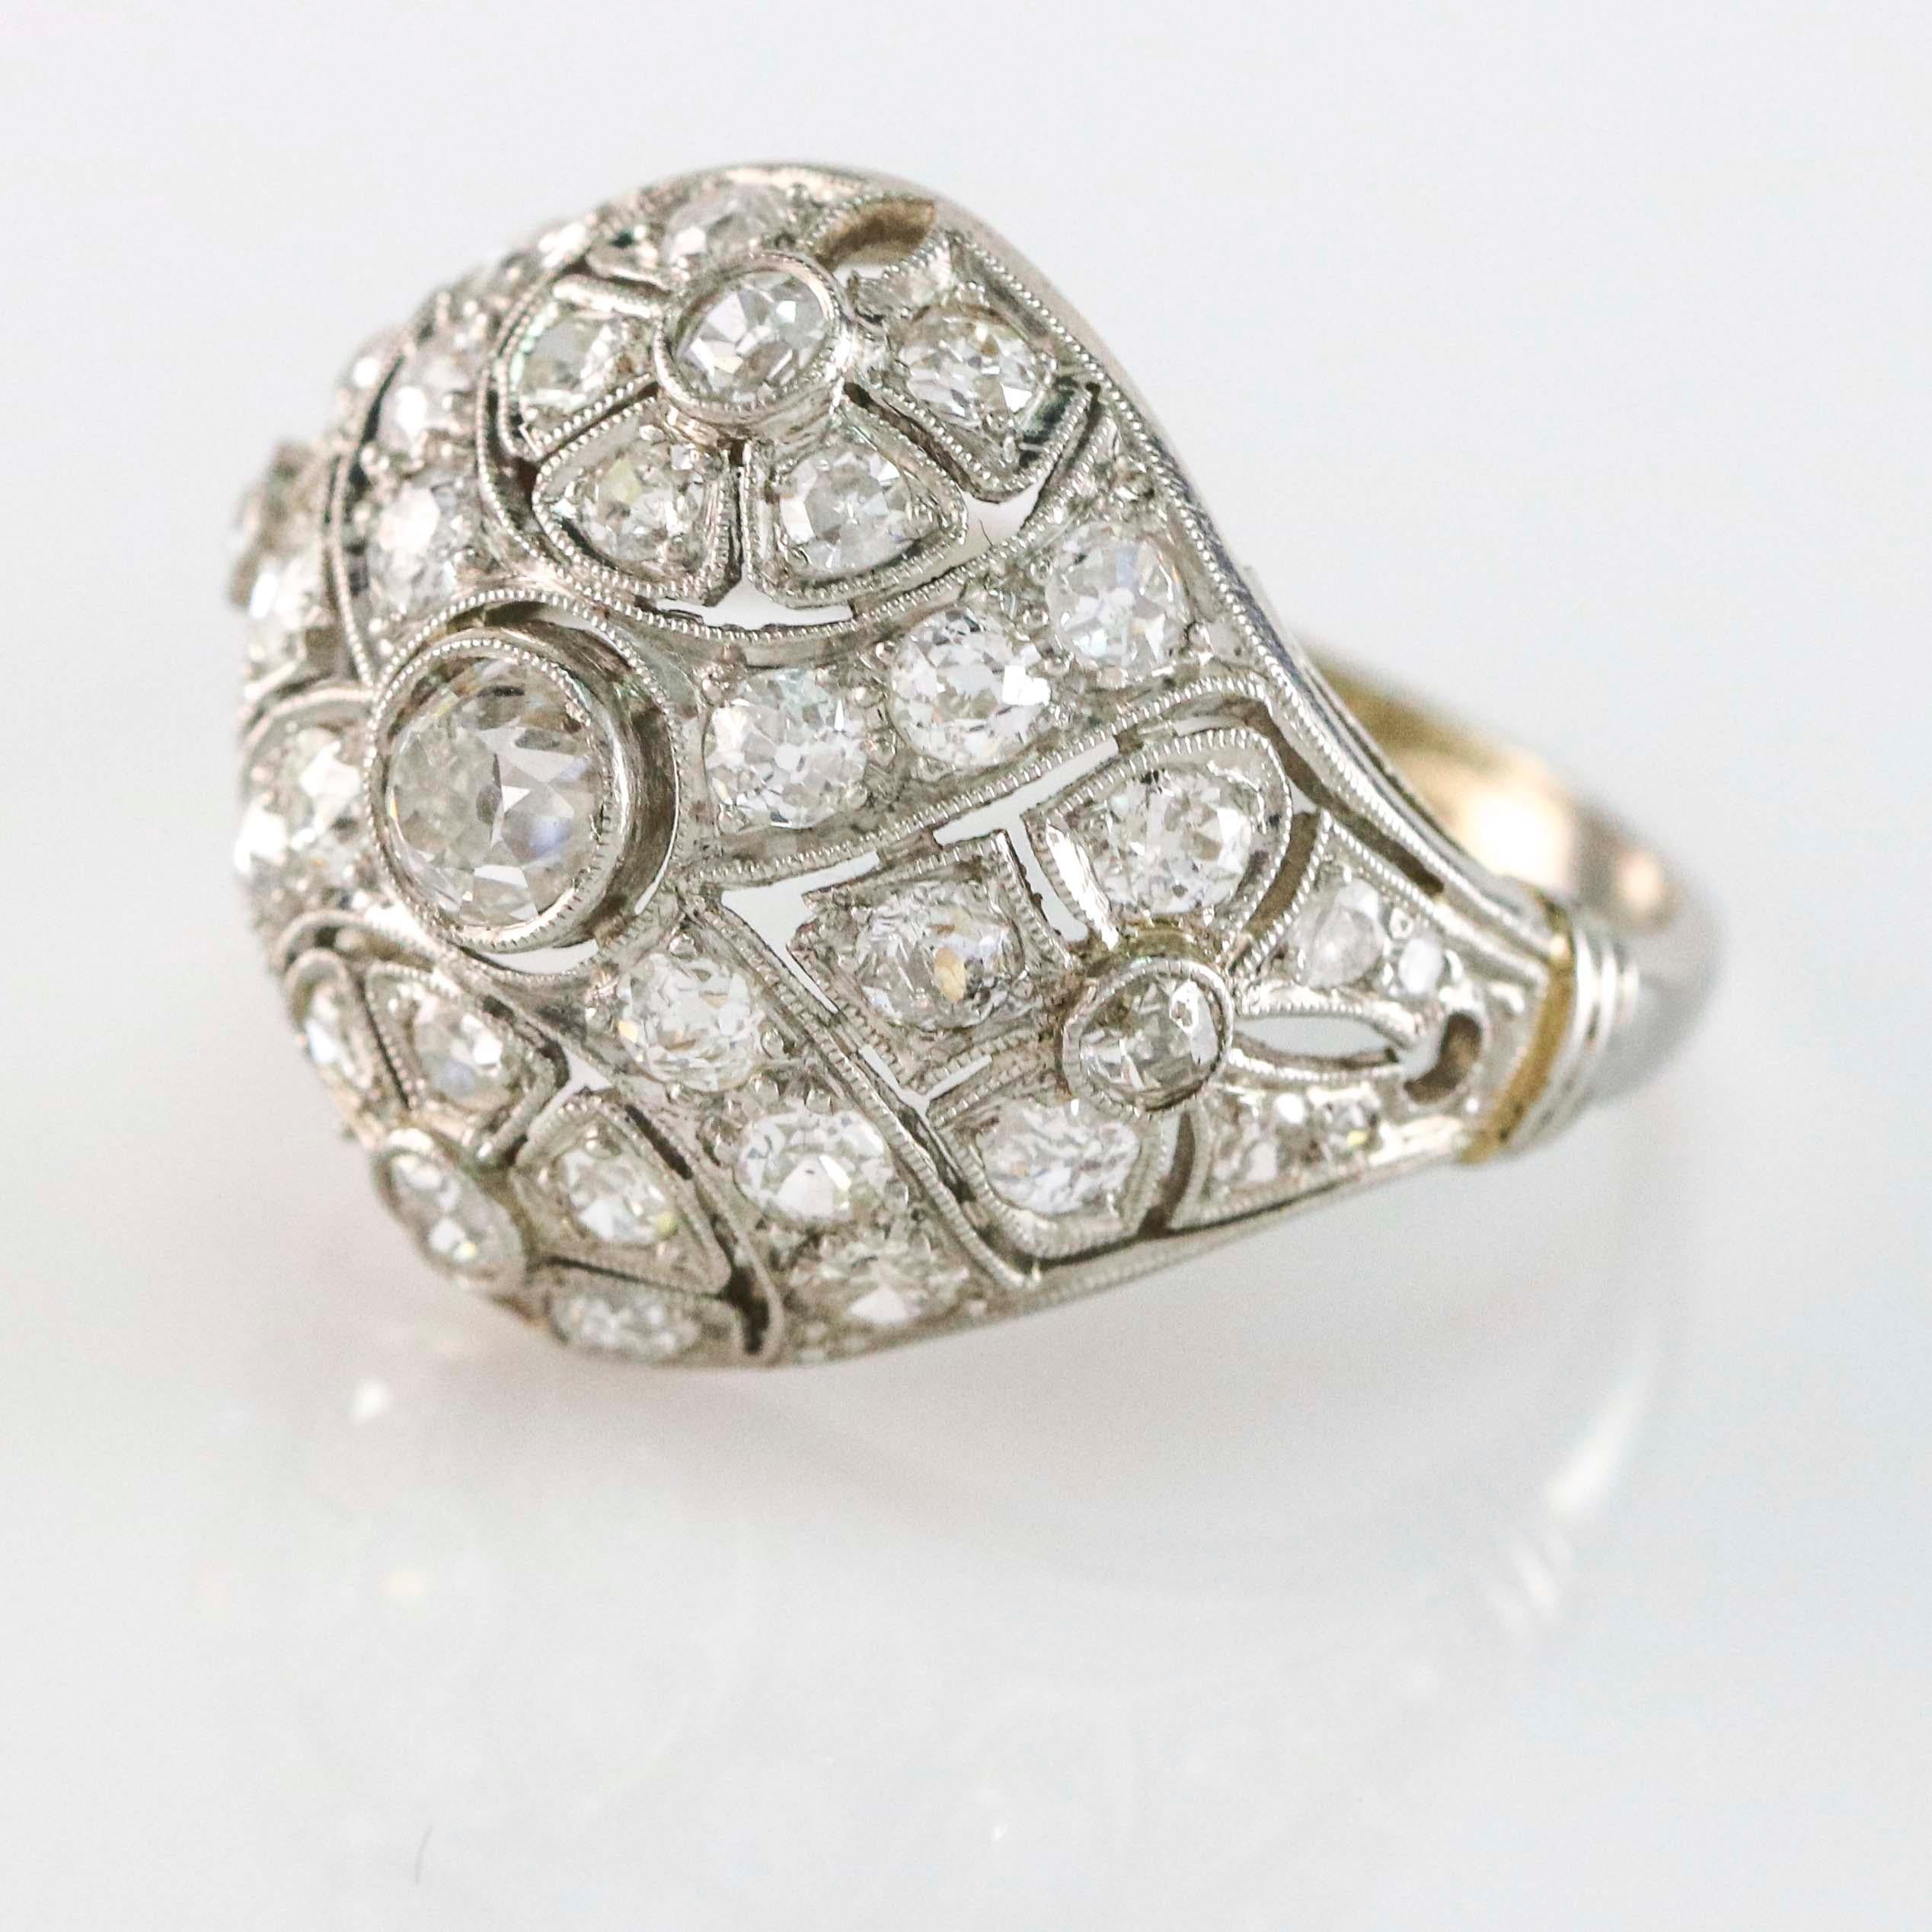 2 Carat Platinum Filigree Edwardian Diamond Dome Ring In Good Condition For Sale In Fort Lauderdale, FL